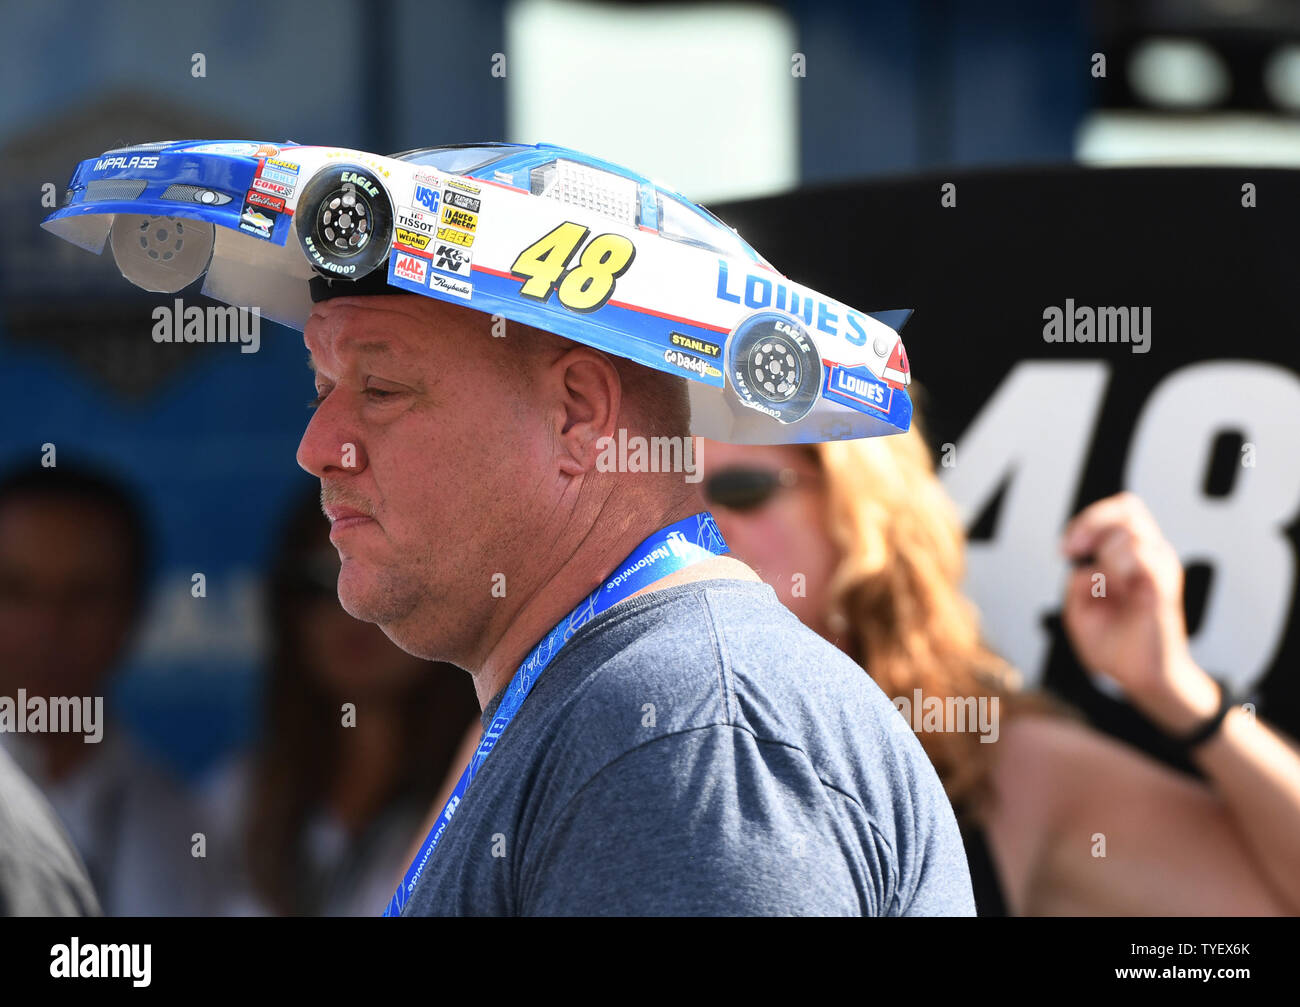 Mike Waterman a NASCAR Nationwide Series Championship fan of driver Jimmy Johnson (48)  is seen wearing c car hat during his final practice laps before the Ford EcoBoost 400 at the Homestead-Miami Speedway in Homestead, Florida on November 19, 2016. The ECOBOOST 400 will be run on Unday, November 20, 2016 at the Homestead-Miami Raceway.  Photo By Gary I Rothstein/UPI Stock Photo